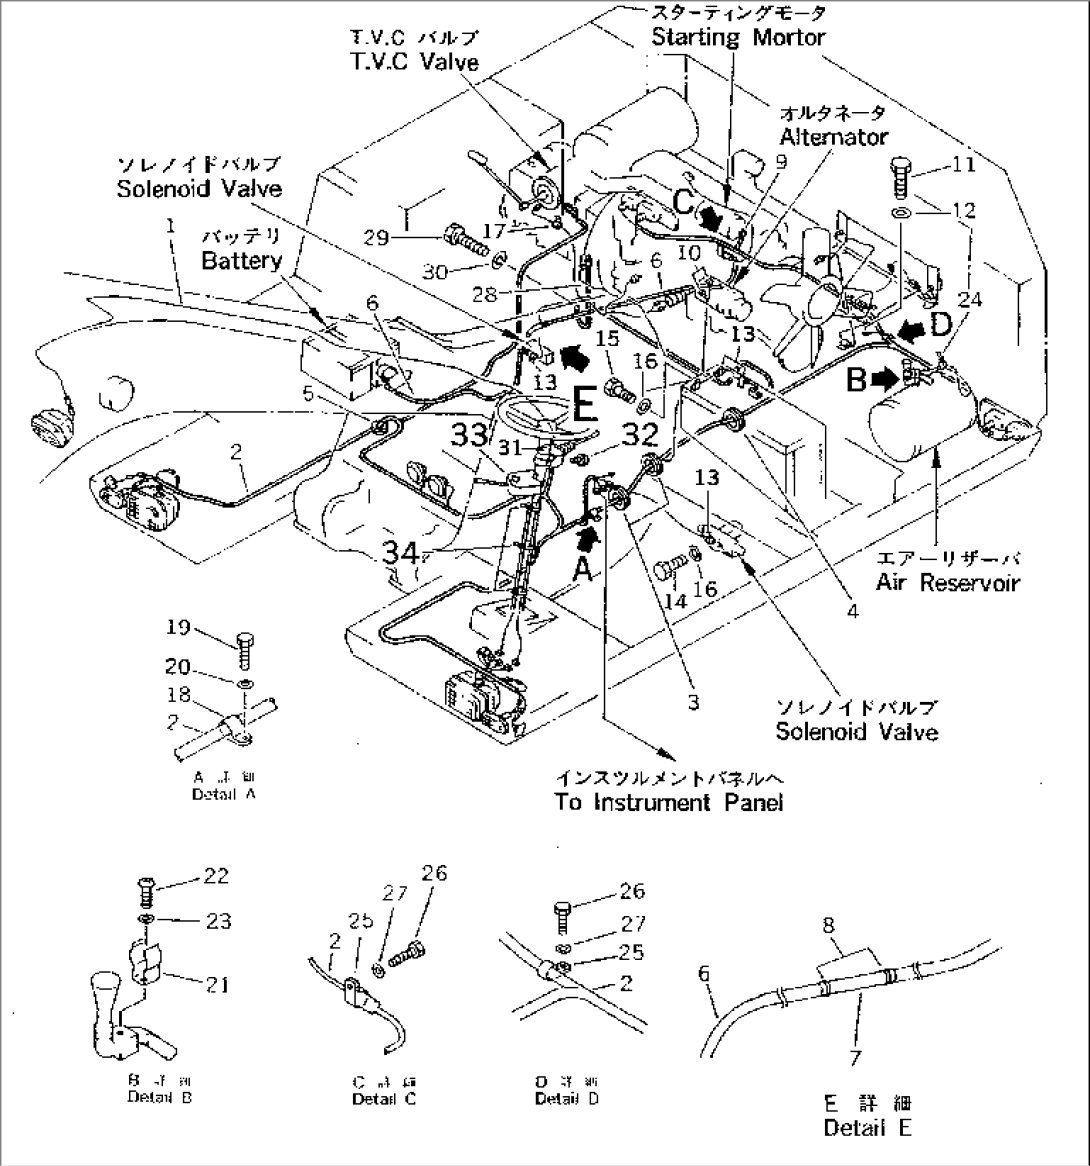 ELECTRICAL SYSTEM (2/2)(#1601-2300)